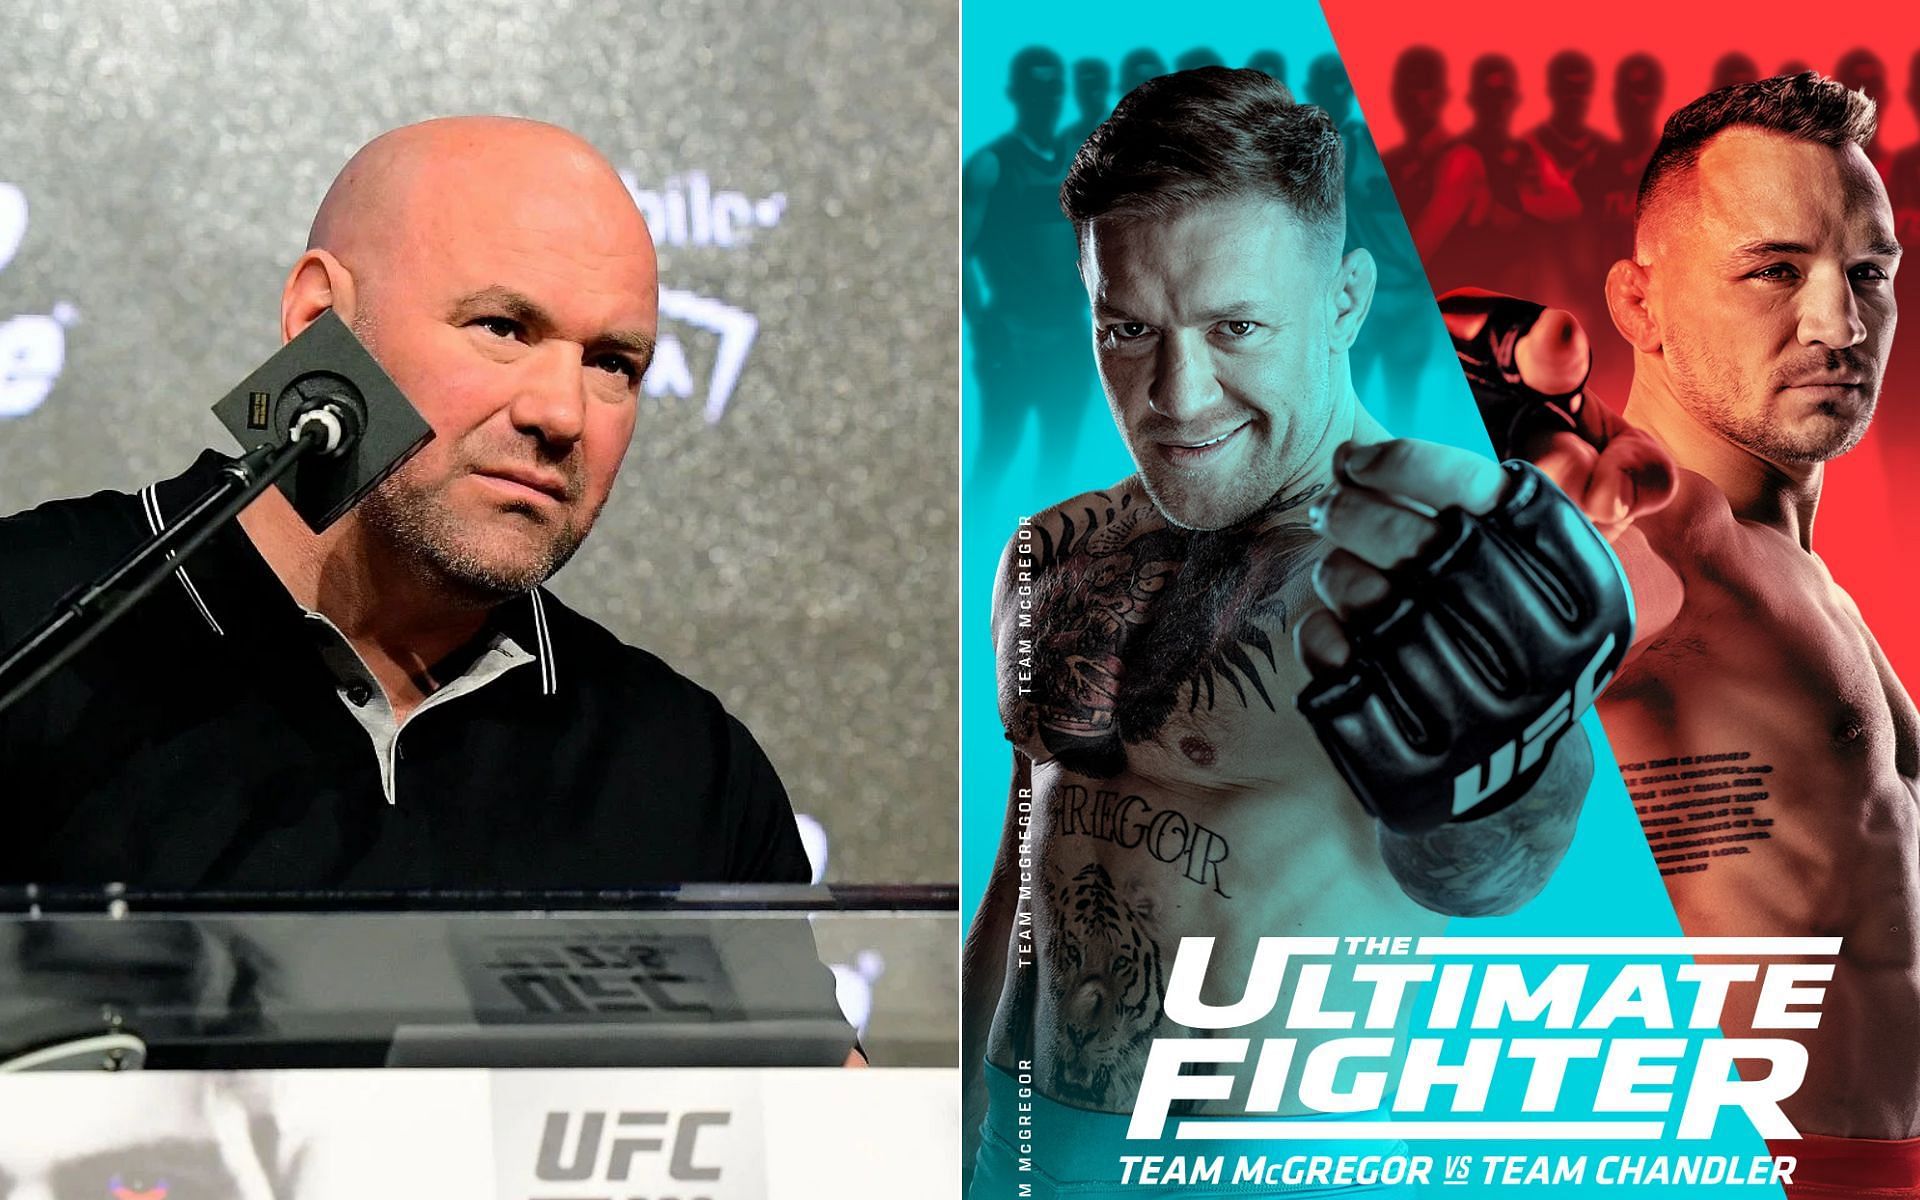 Dana White [Left], and The Ultimate Fighter: Team McGregor vs Team Chandler poster [Right] [Photo credit: @espnmma - Twitter]